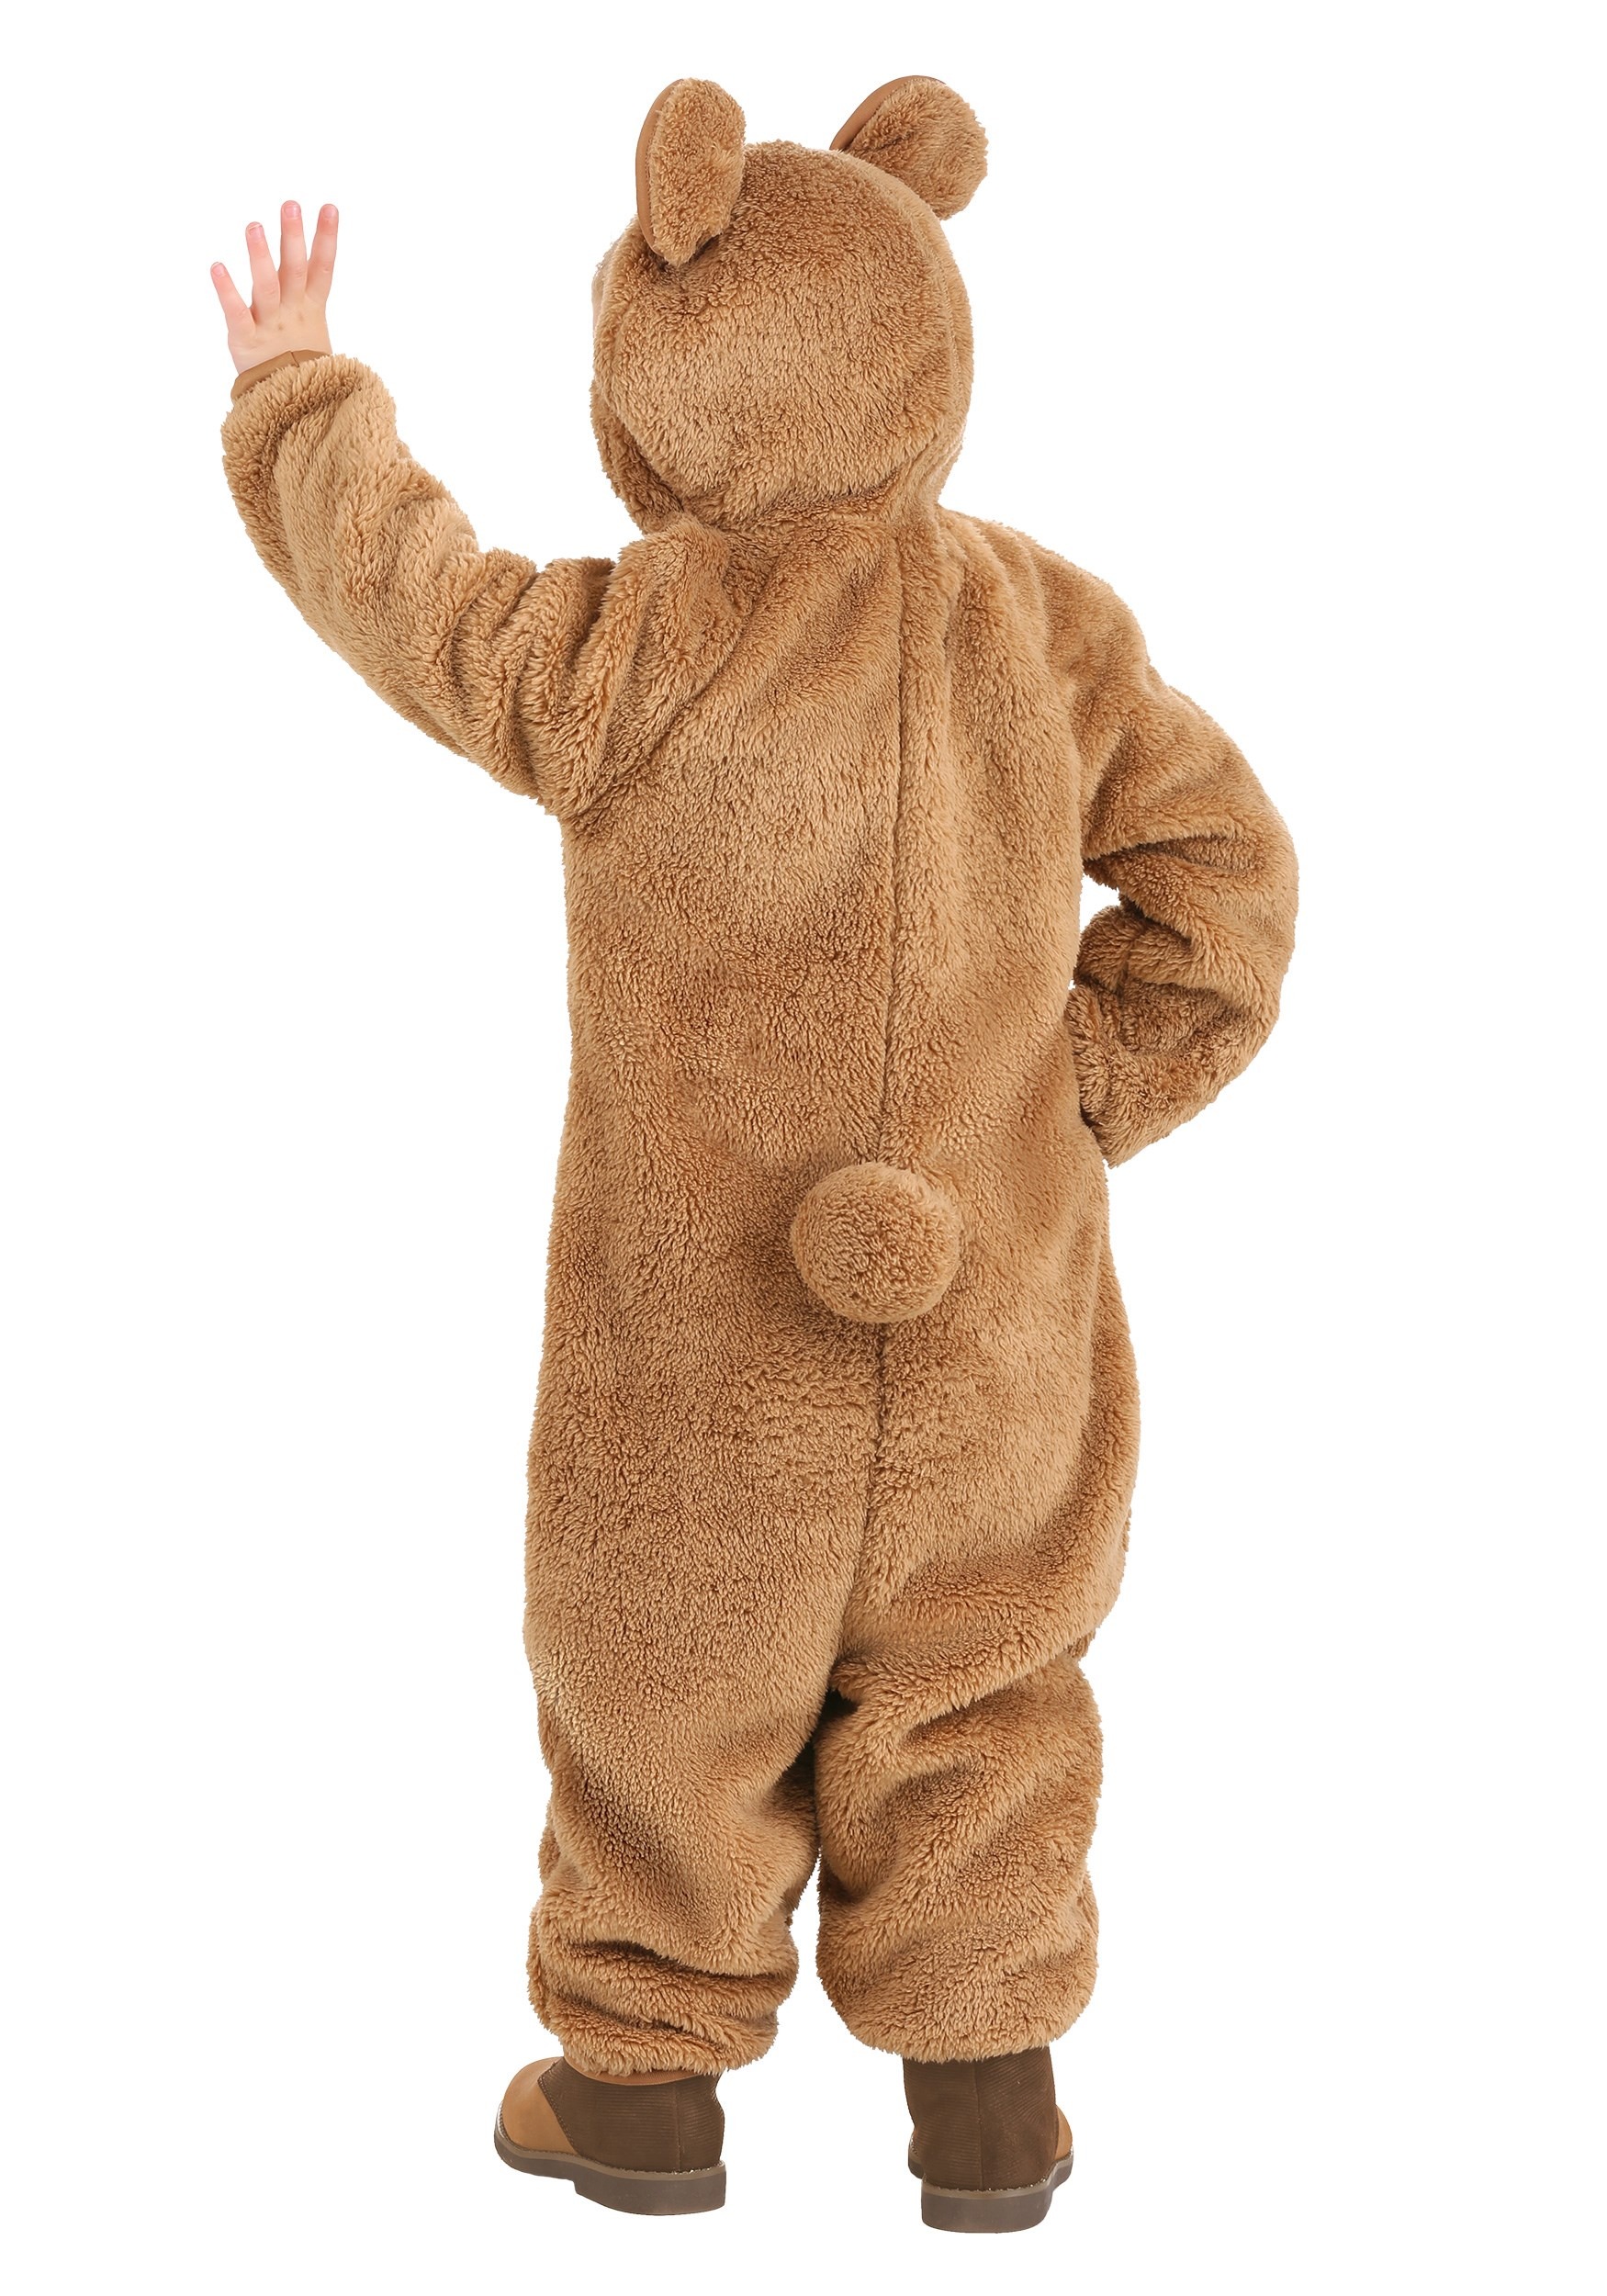 Little Teddy Costume For Toddlers